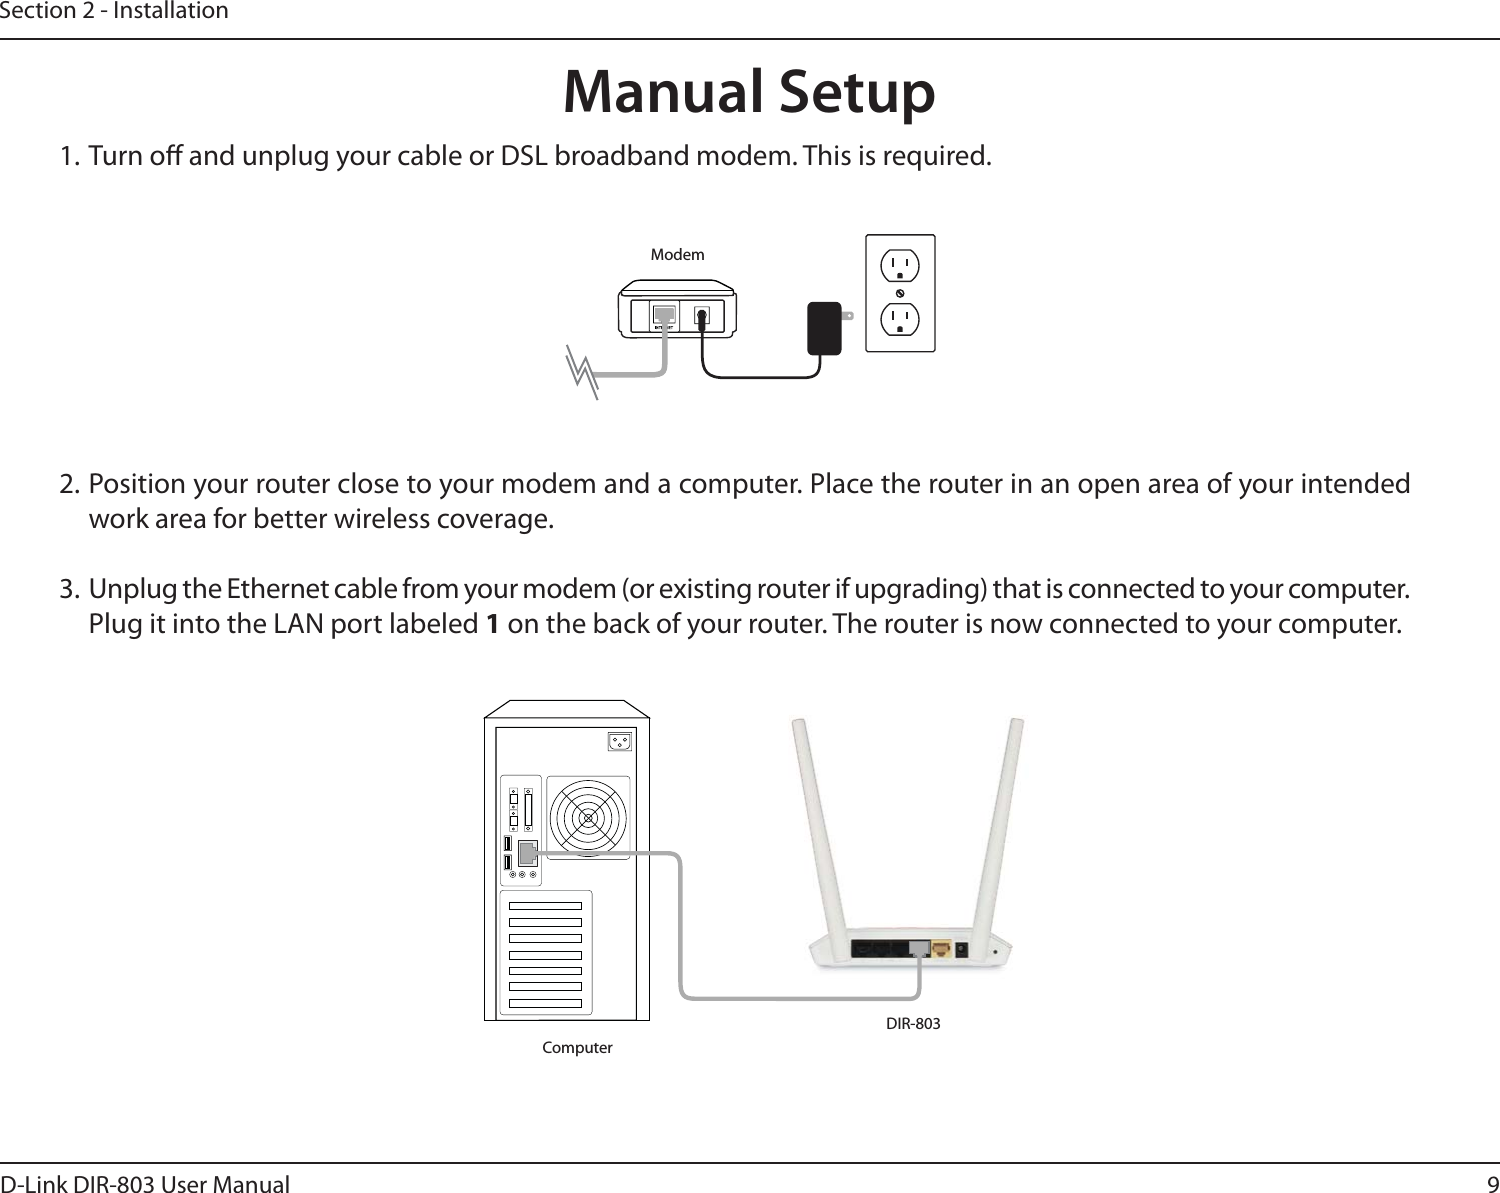 9D-Link DIR-803 User ManualSection 2 - Installation1. Turn o and unplug your cable or DSL broadband modem. This is required.Manual Setup2. Position your router close to your modem and a computer. Place the router in an open area of your intended work area for better wireless coverage.3.  Unplug the Ethernet cable from your modem (or existing router if upgrading) that is connected to your computer. Plug it into the LAN port labeled 1 on the back of your router. The router is now connected to your computer.ModemDIR-803Computer